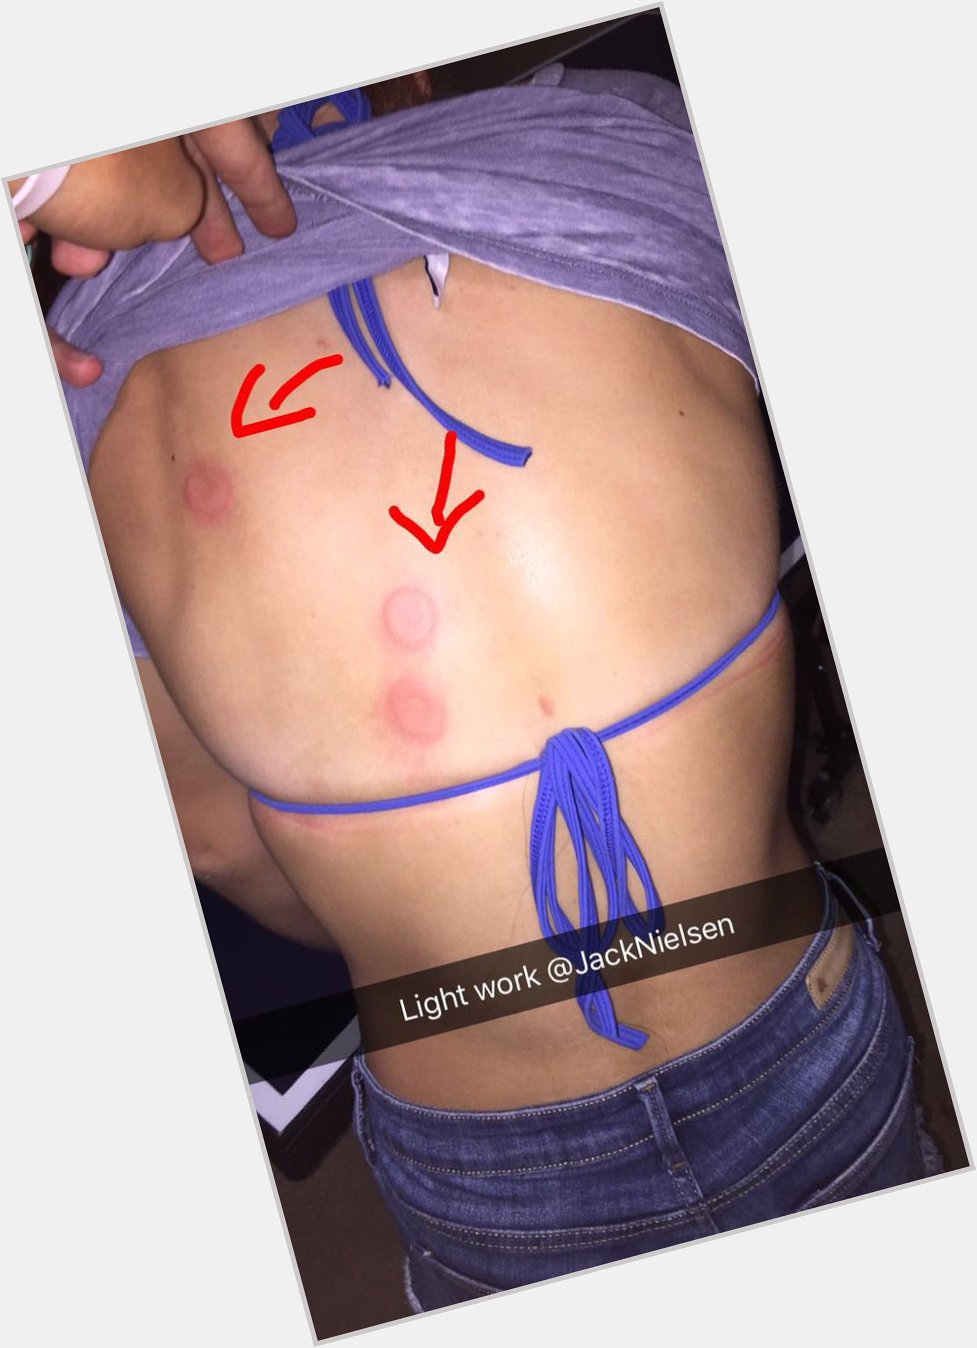 Happy birthday another sting pong game soon??    